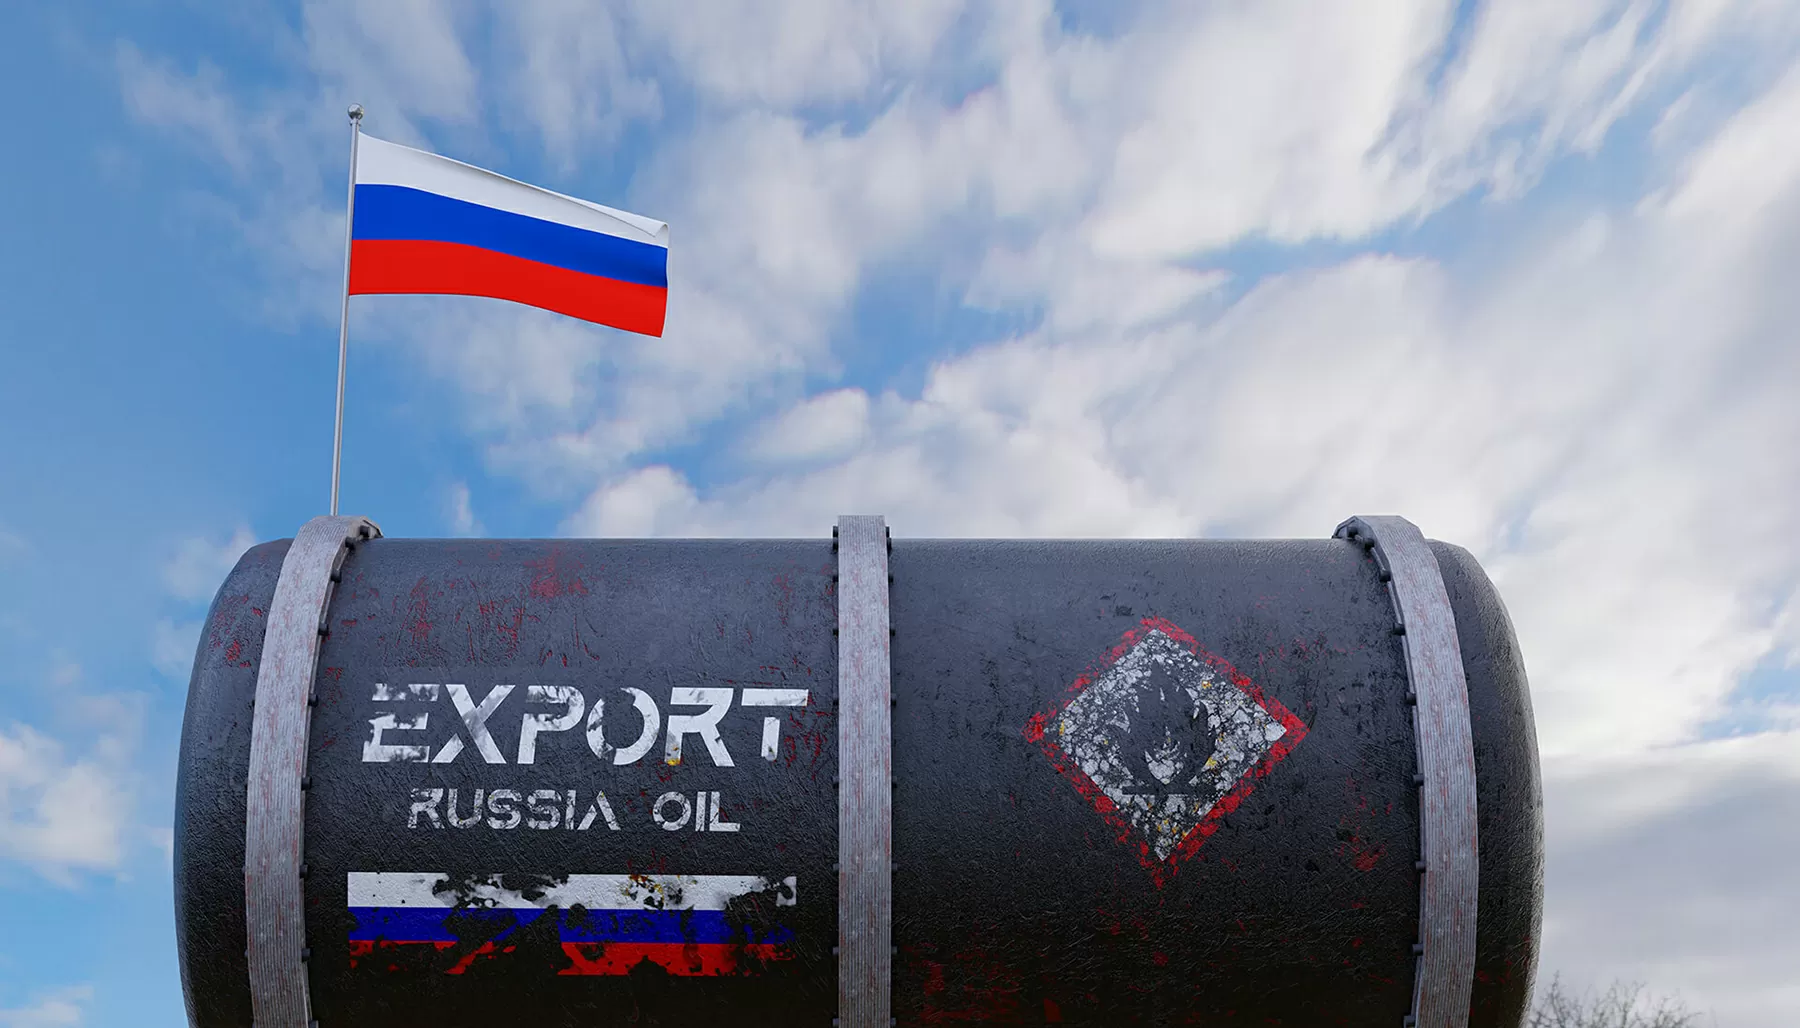 the first shipment of Russian Crude oil will act as a test cargo to bridge the trust deficit between both sides.